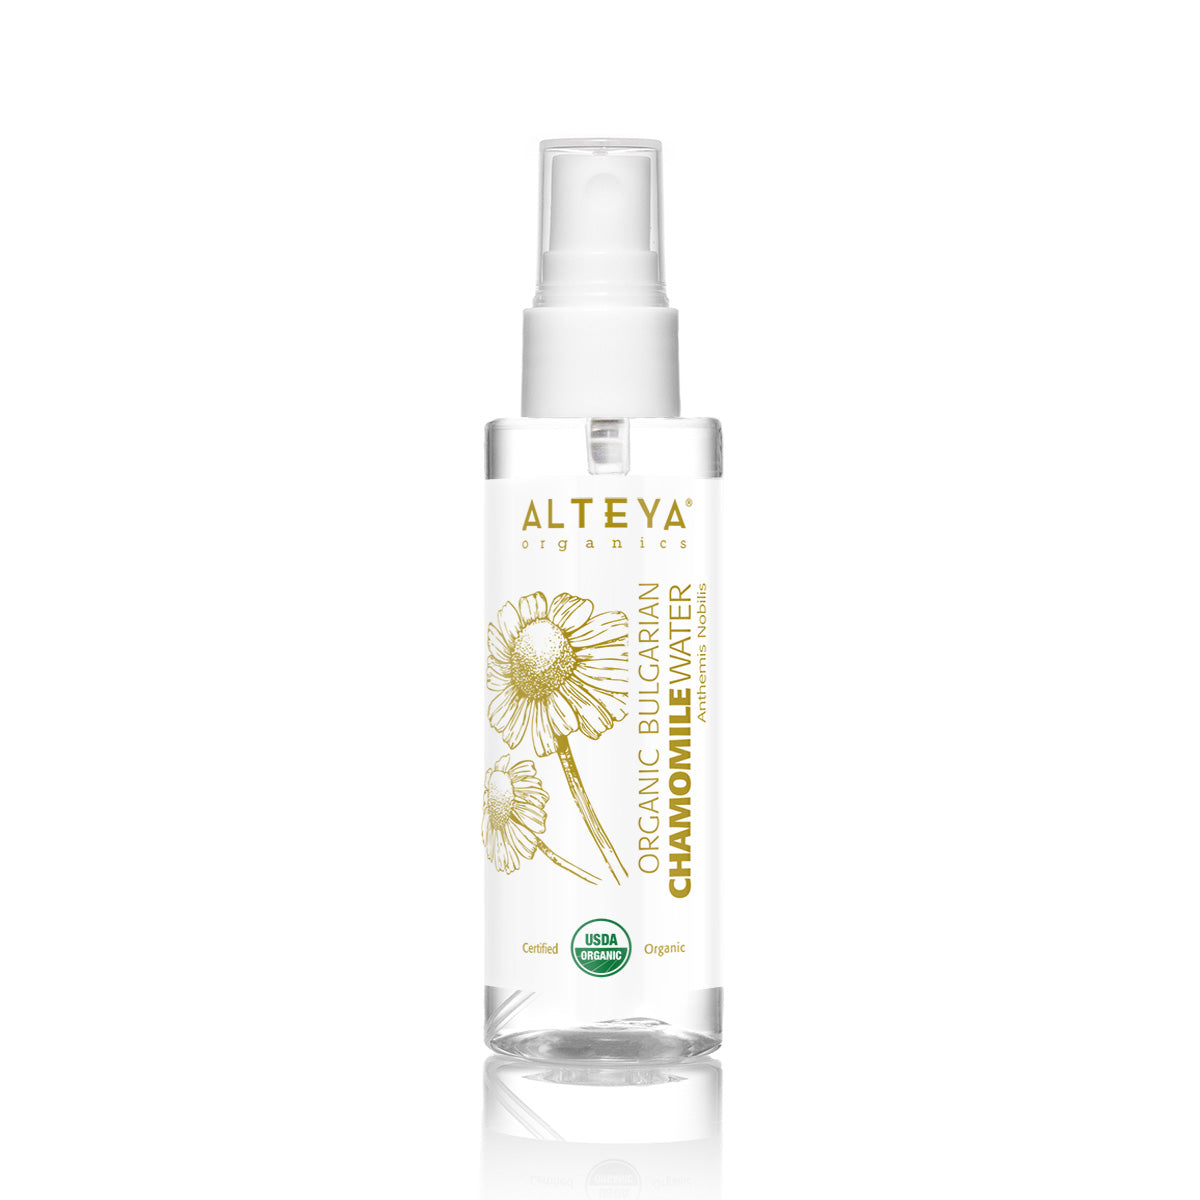 A bottle of Alteya Organics Organic Bulgarian Chamomile Water - Spray 3.4 Fl Oz, an ideal skin solution for inflammation and hydration, showcased against a clean white background.